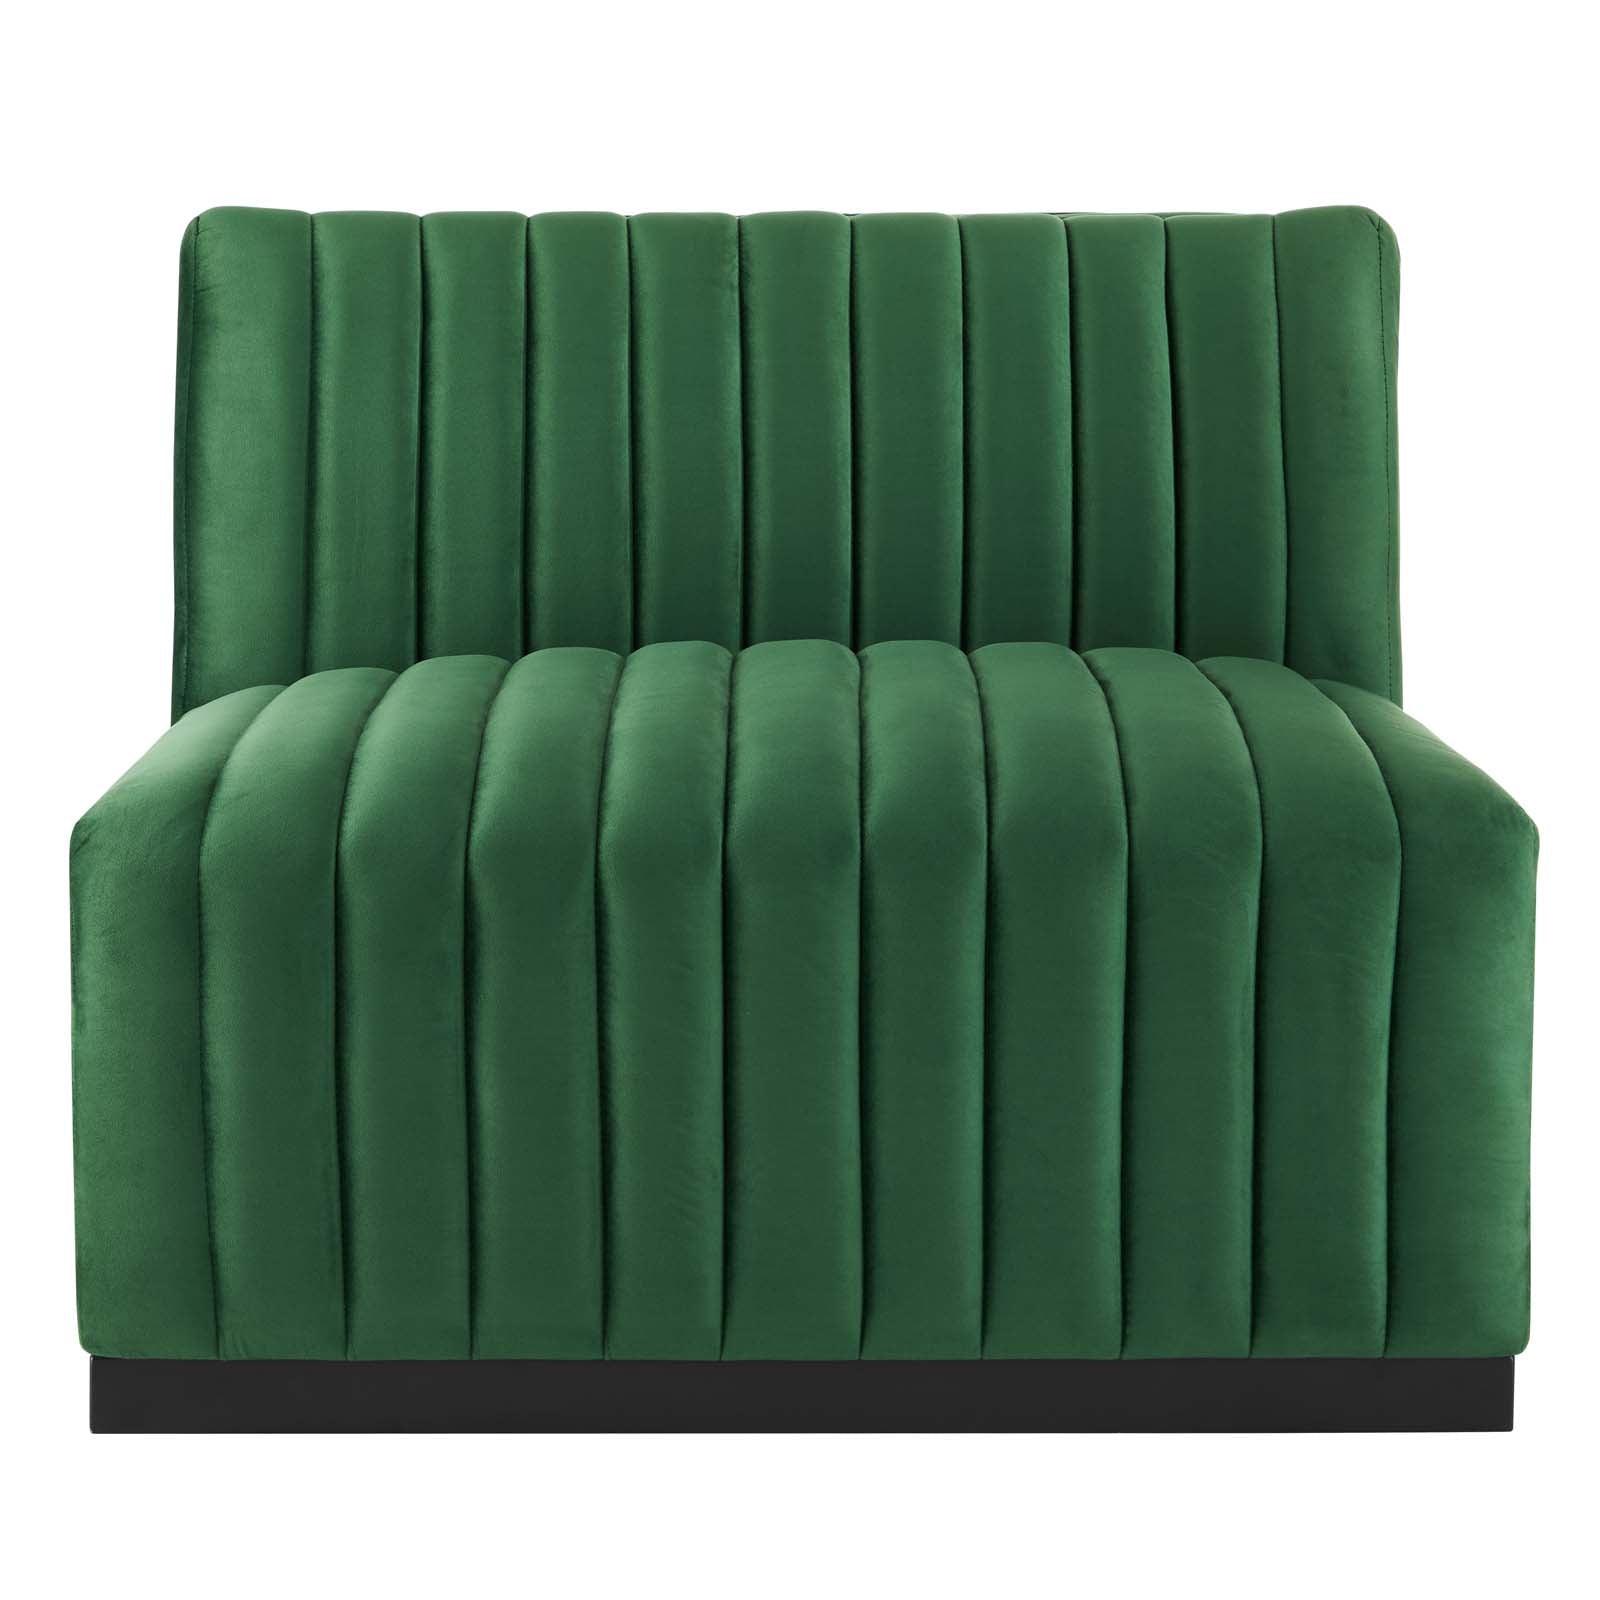 Conjure Channel Tufted Performance Velvet Armless Chair-Chair-Modway-Wall2Wall Furnishings